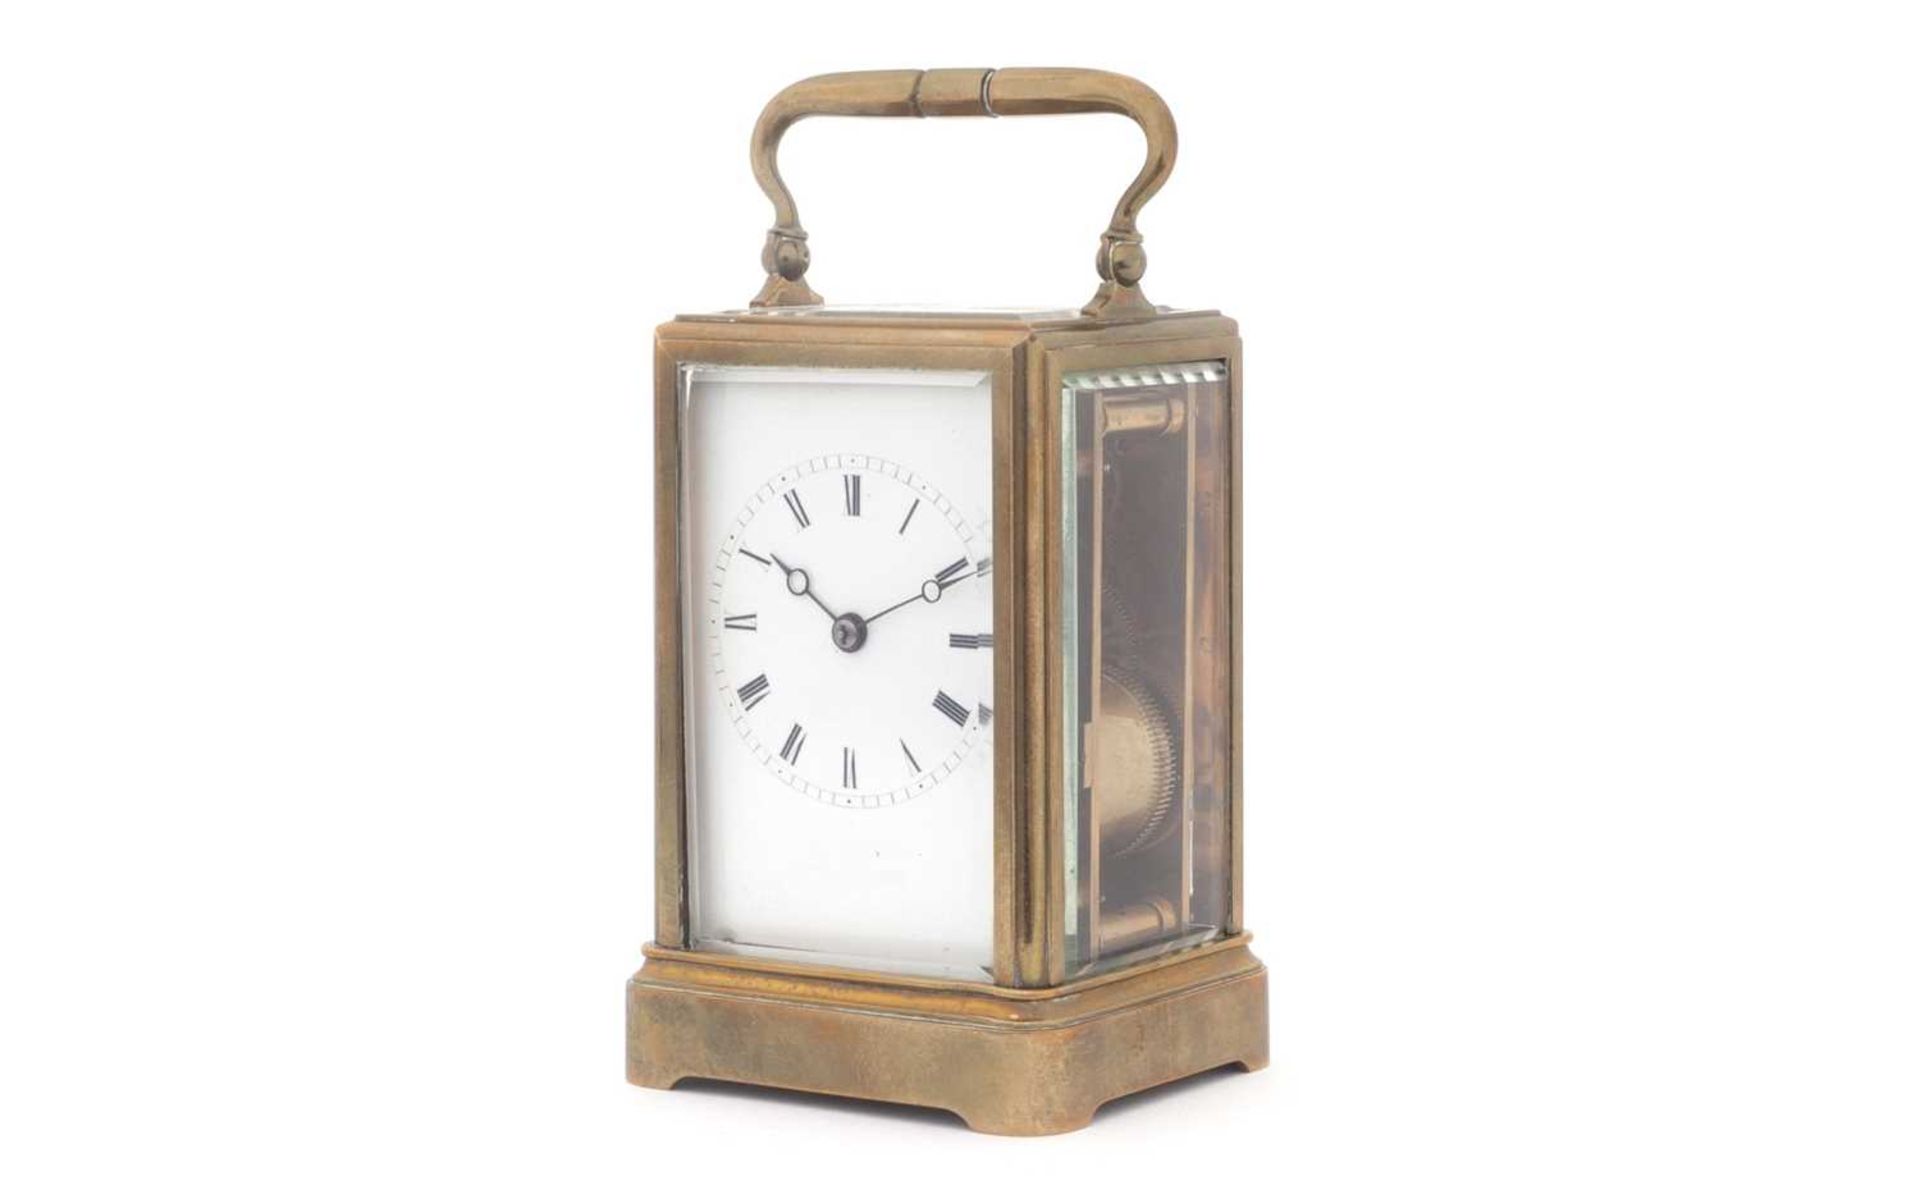 A MID 19TH CENTURY FRENCH BRASS CARRIAGE CLOCK BY LEROY, PARIS